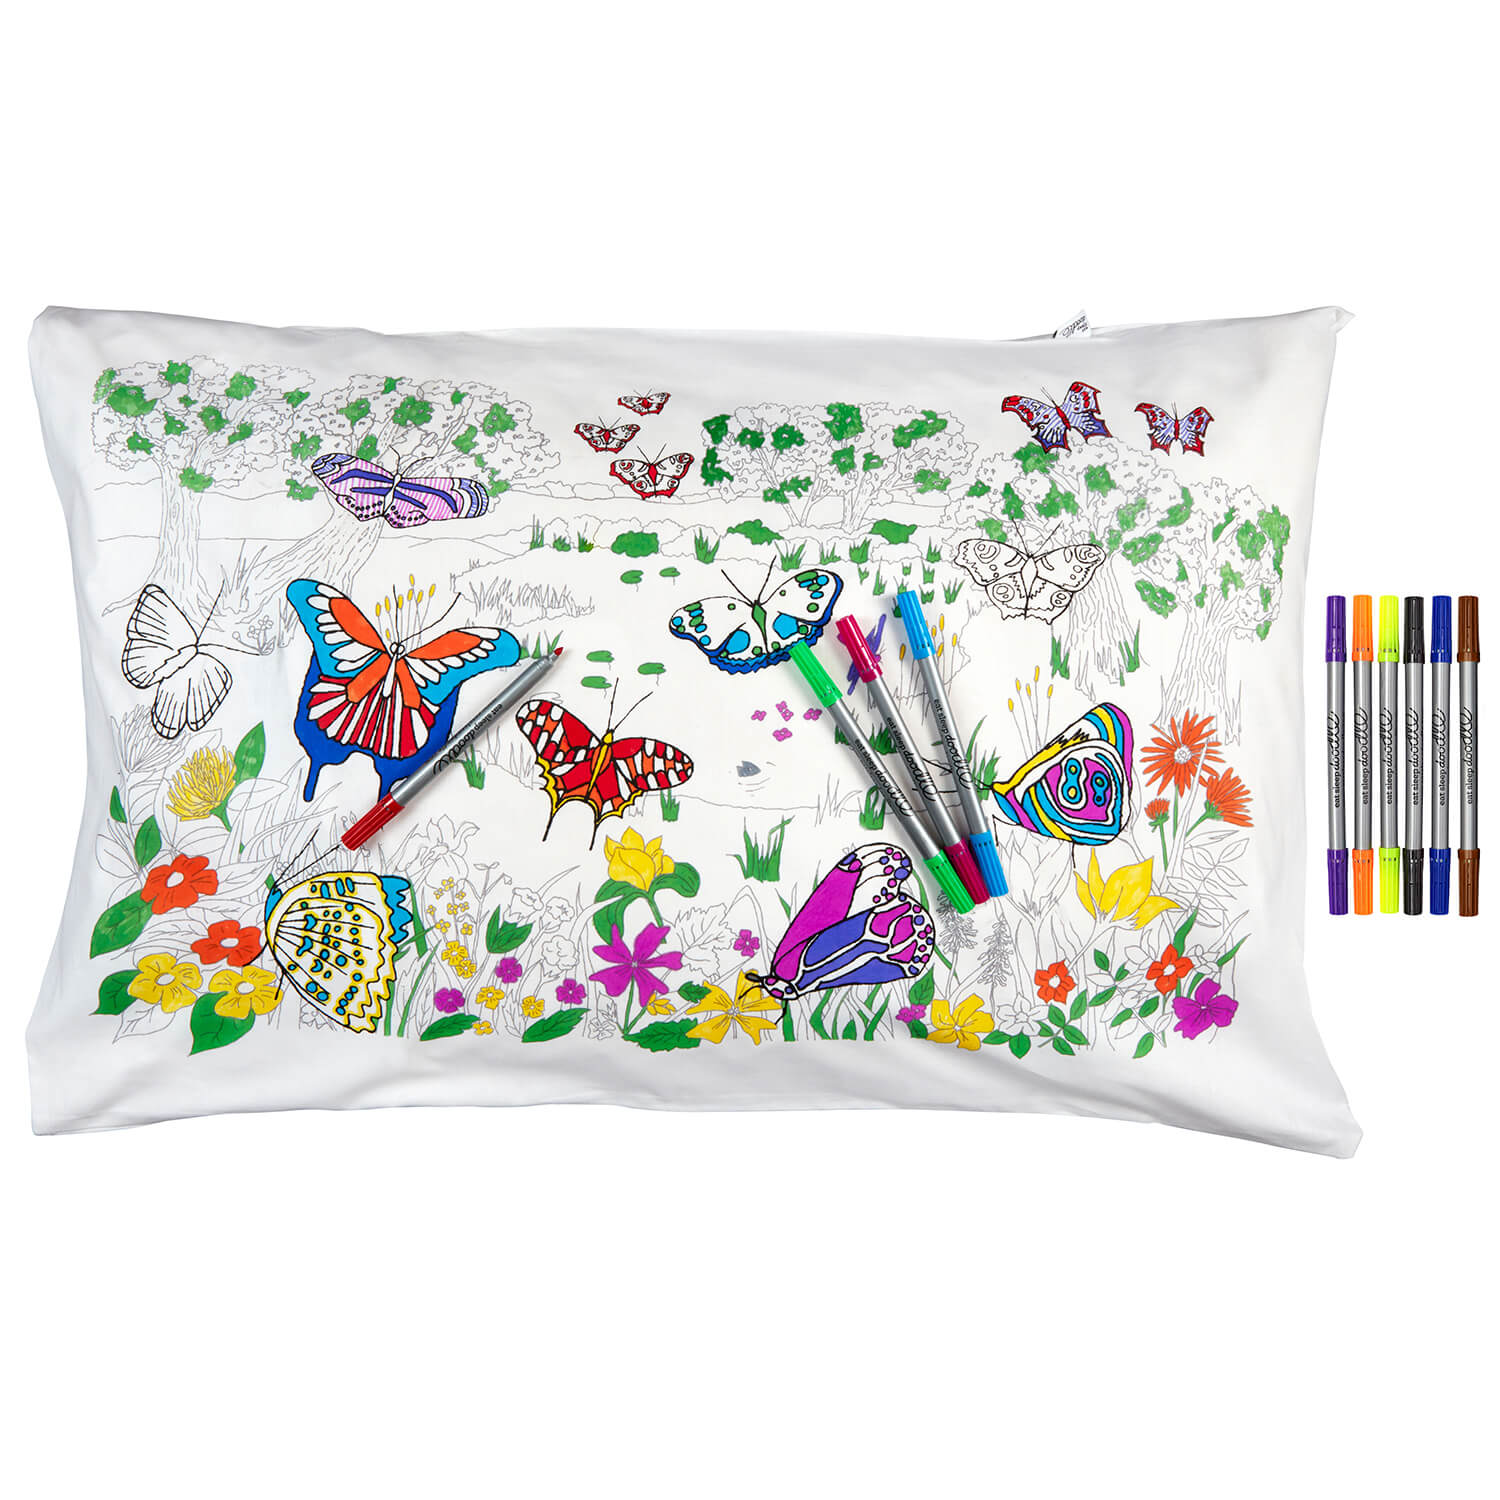 Eat Sleep Doodle Butterfly Pillowcase - White 1 Shaws Department Stores